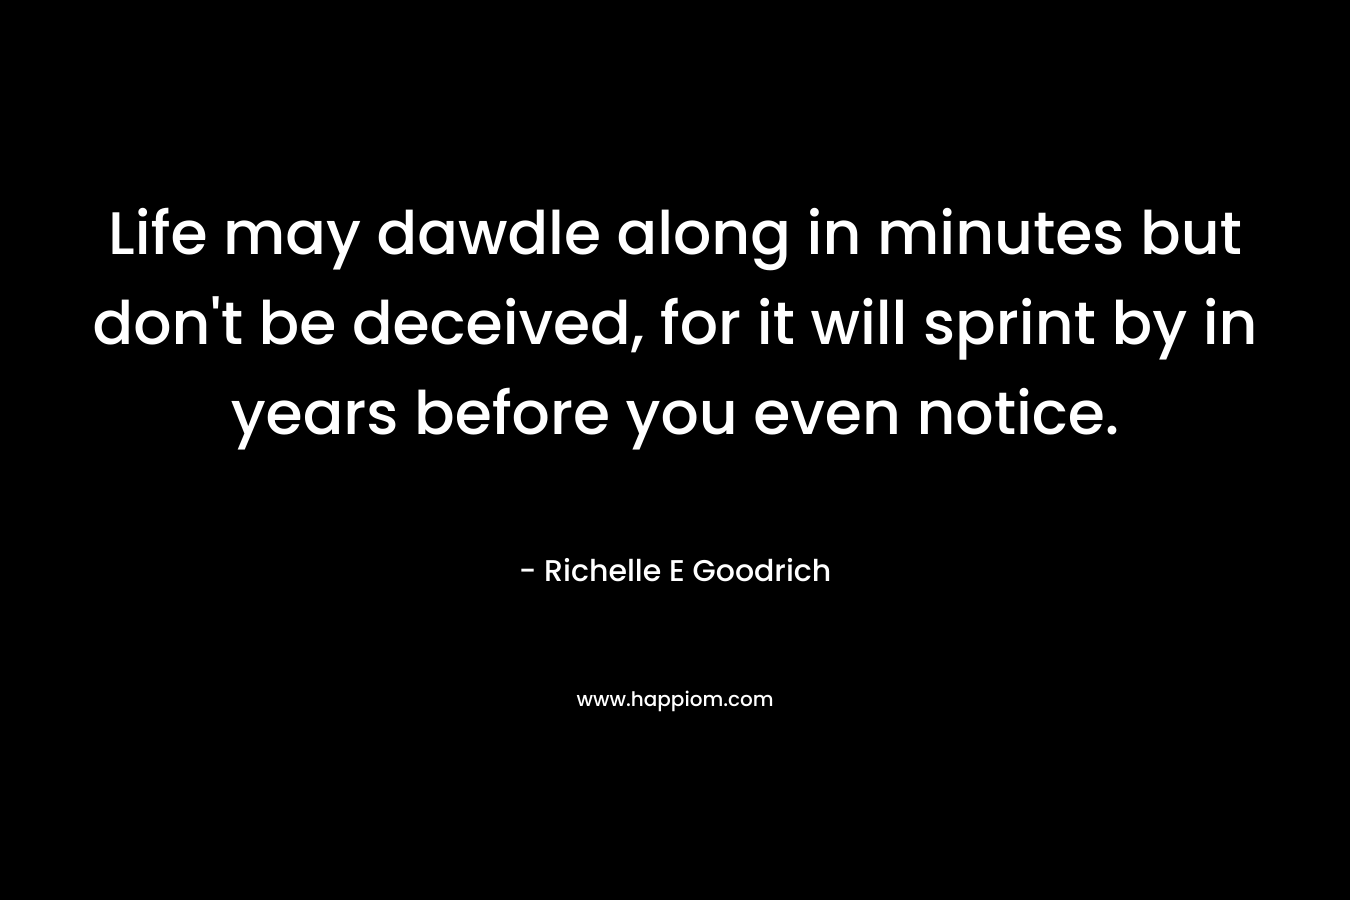 Life may dawdle along in minutes but don’t be deceived, for it will sprint by in years before you even notice. – Richelle E Goodrich